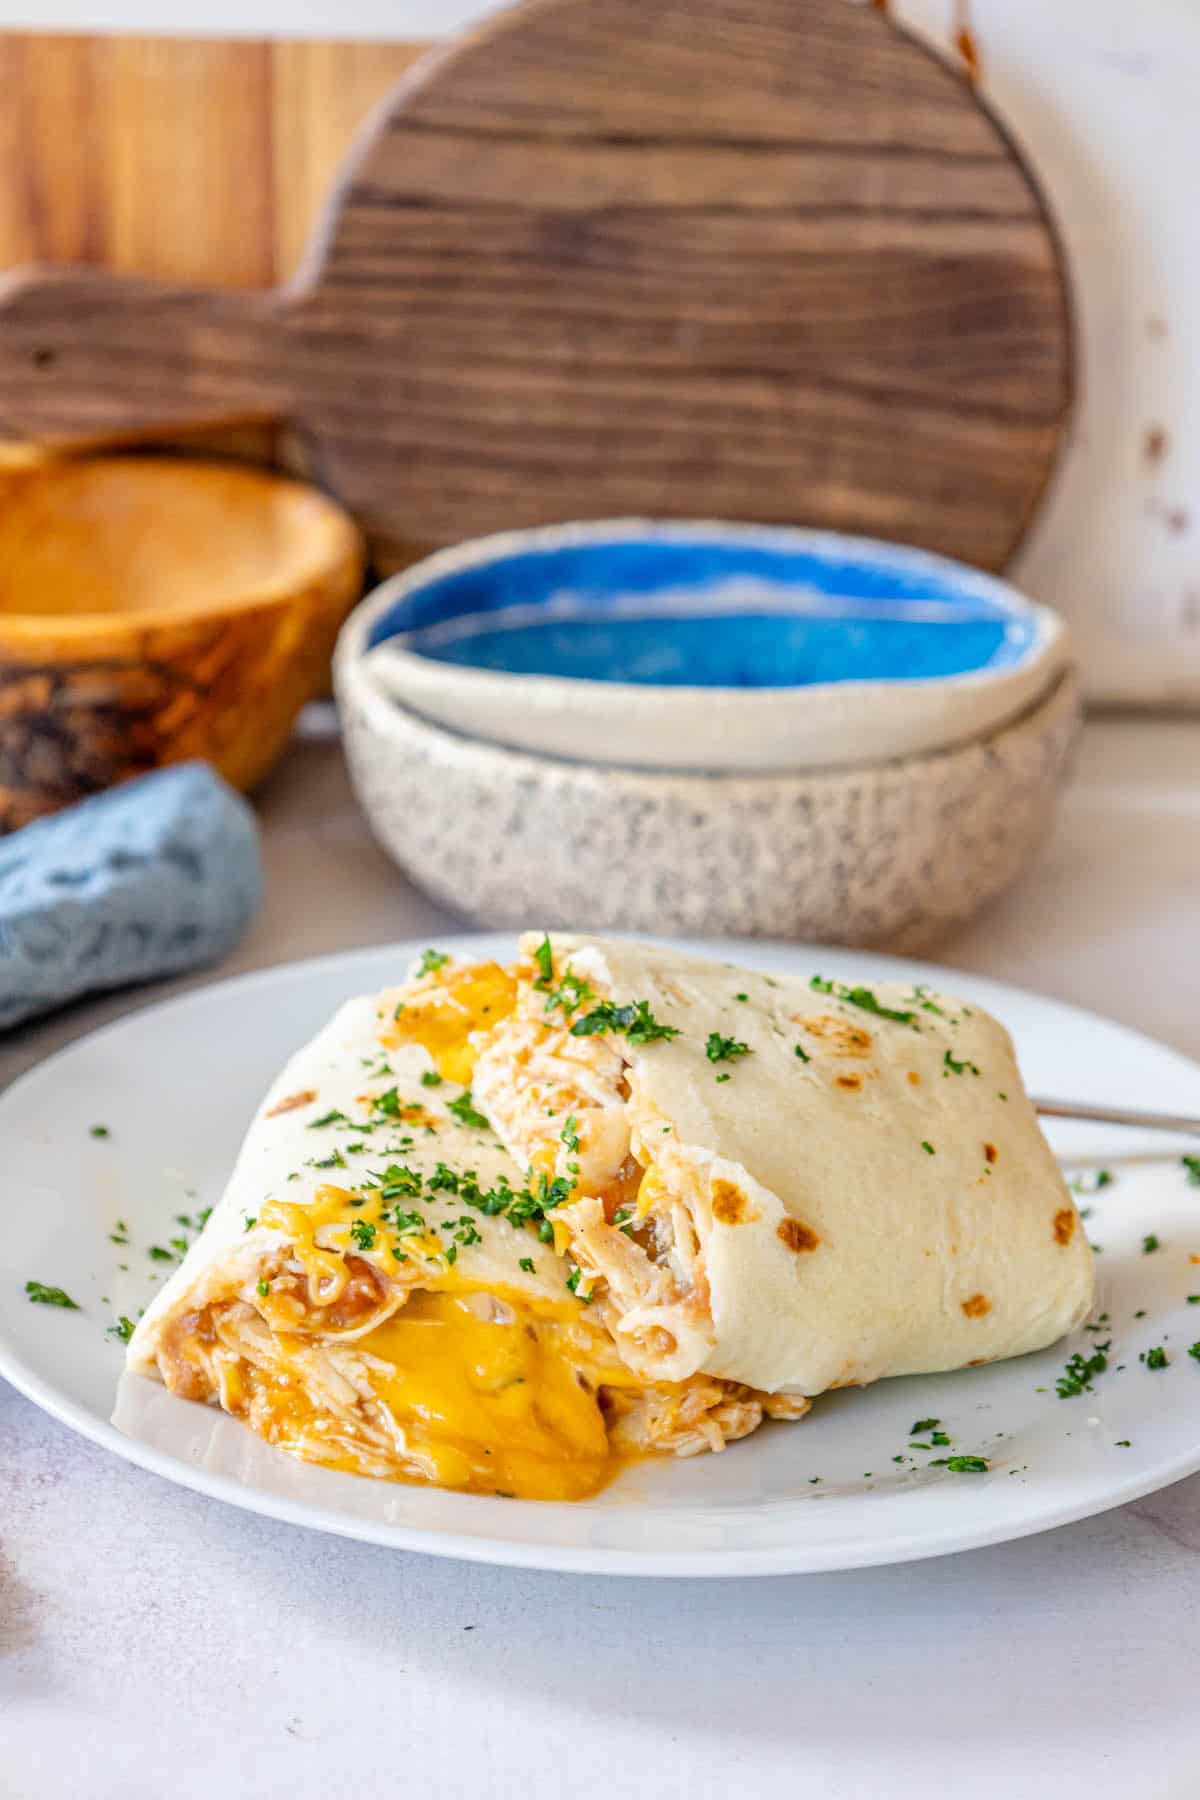 Baked chicken quesadilla on a white plate.